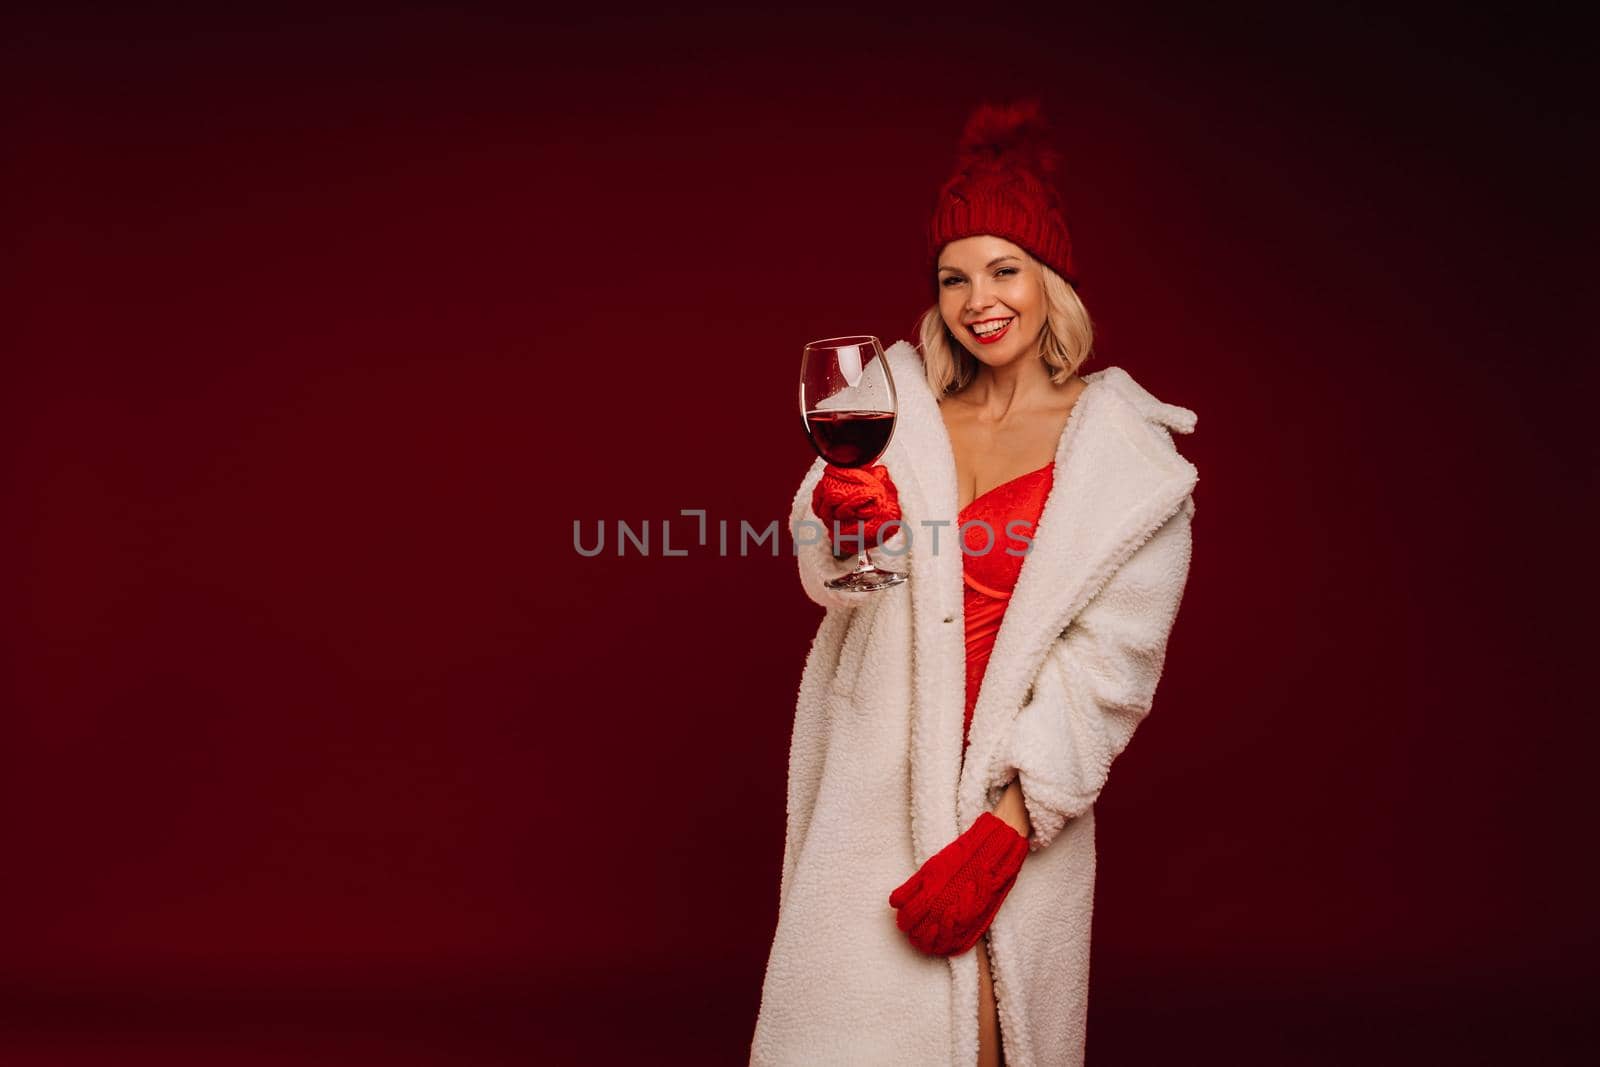 portrait of a smiling girl in a white fur coat and underwear holding a glass of champagne on a red background.